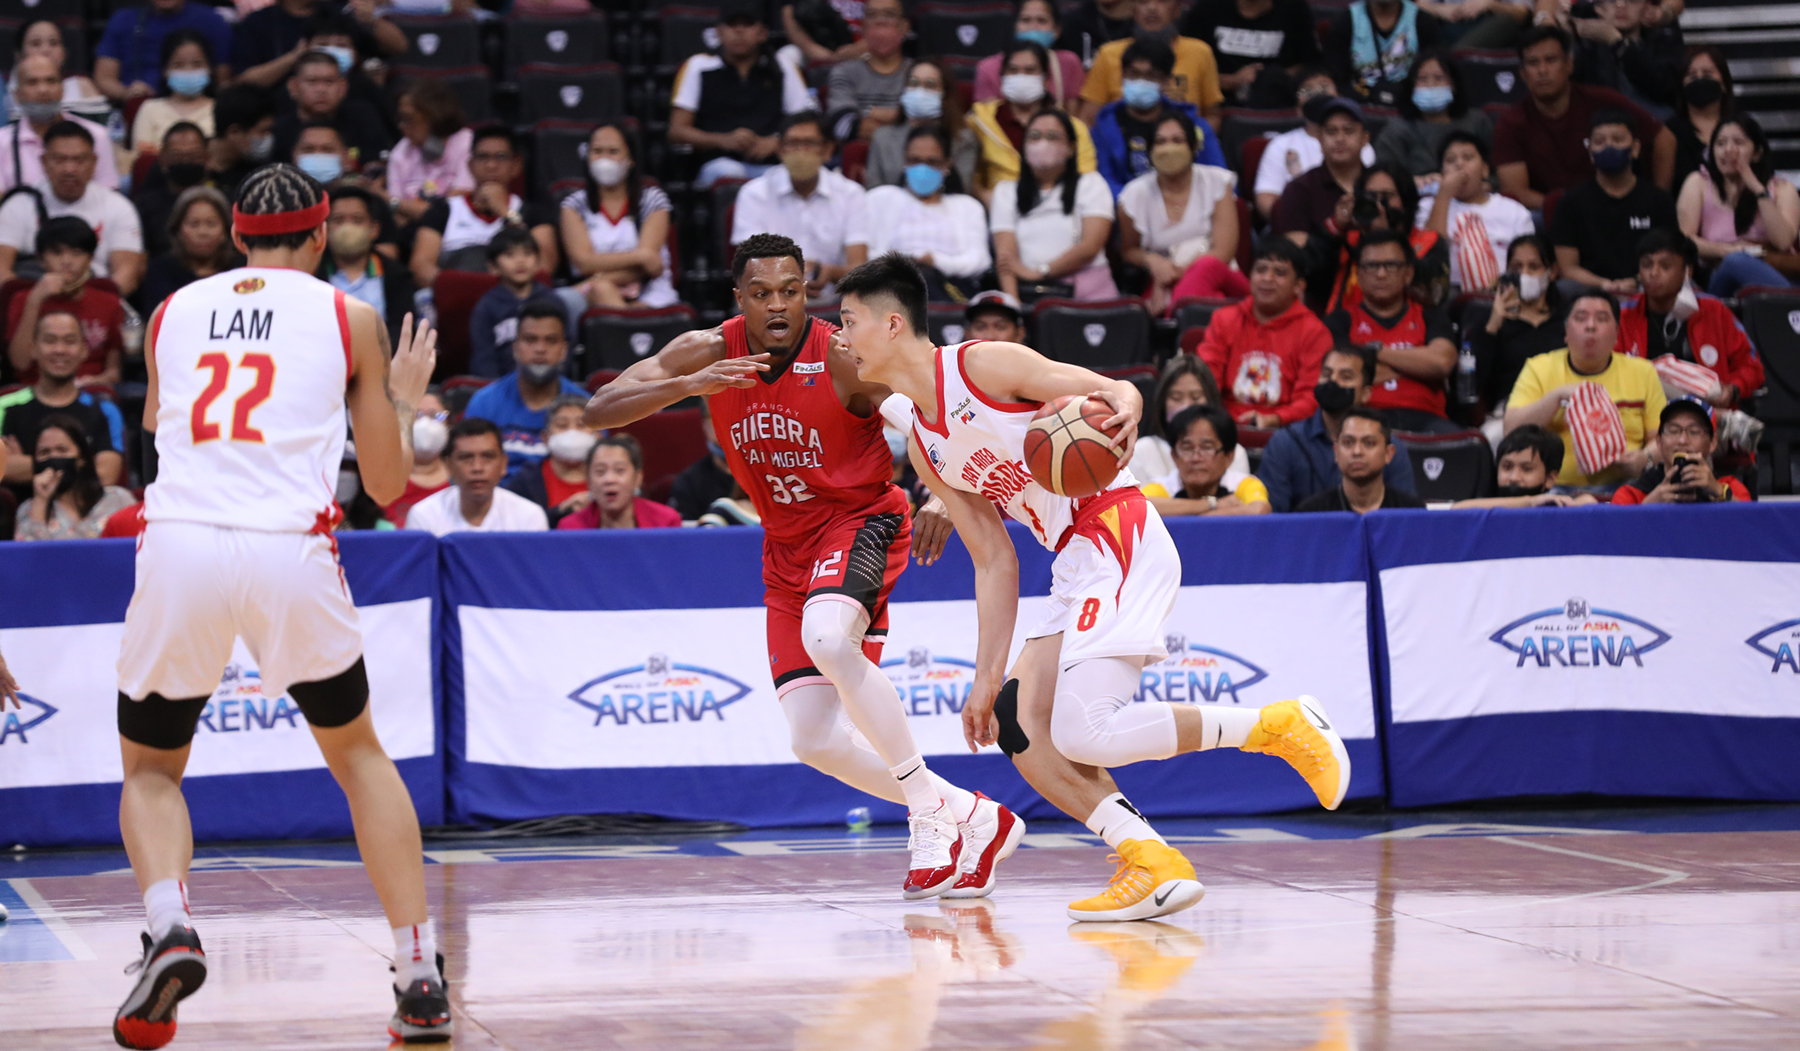 Bay Area's Zhu Songwei vs Ginebra's Justin Brownlee. –PBA IMAGES